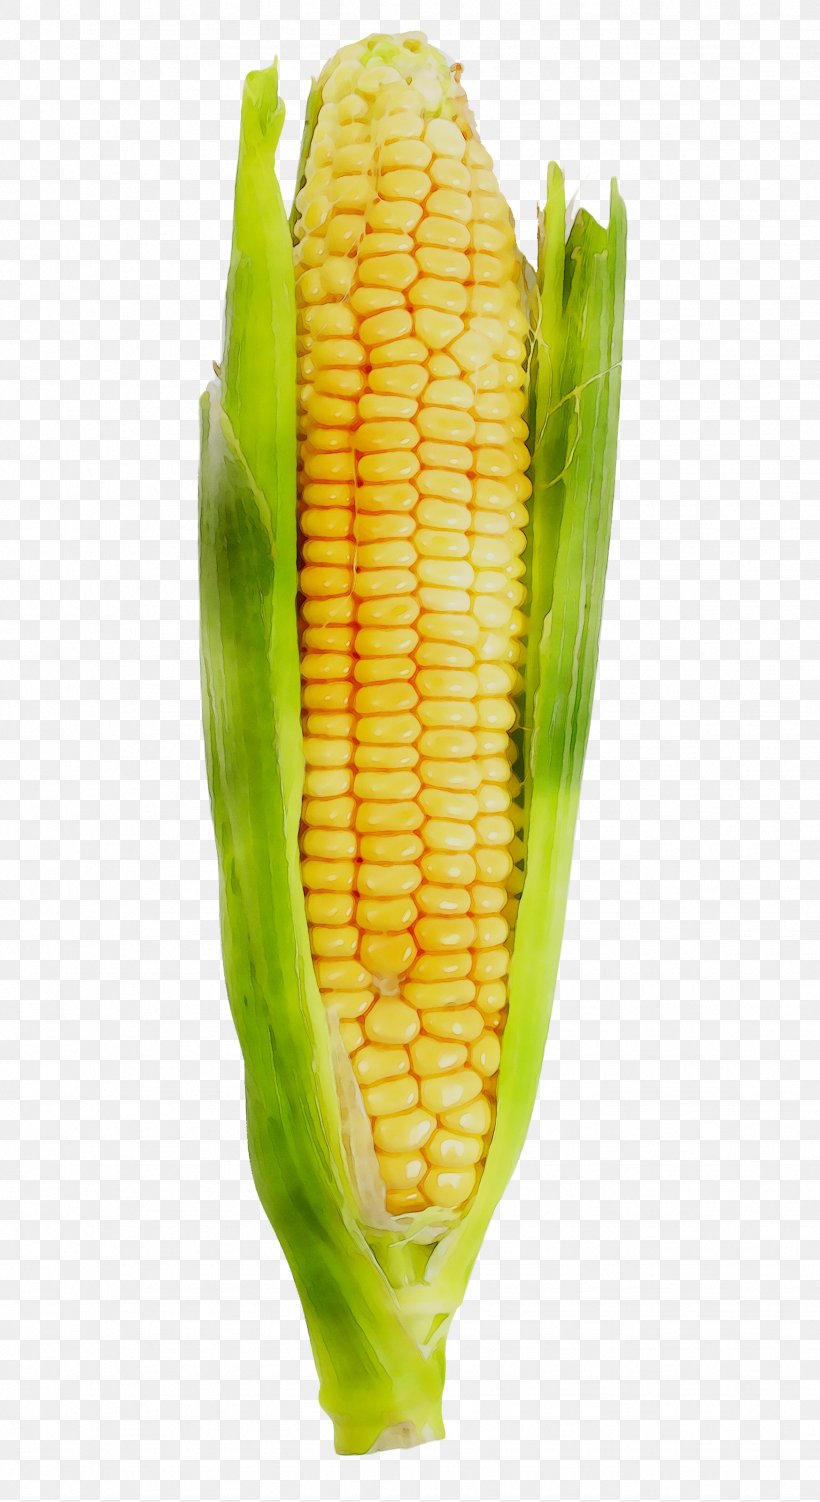 Corn On The Cob Dietary Supplement Sweet Corn Corn Kernel, PNG, 1746x3200px, Corn On The Cob, Advertising, Animal, Commodity, Corn Download Free